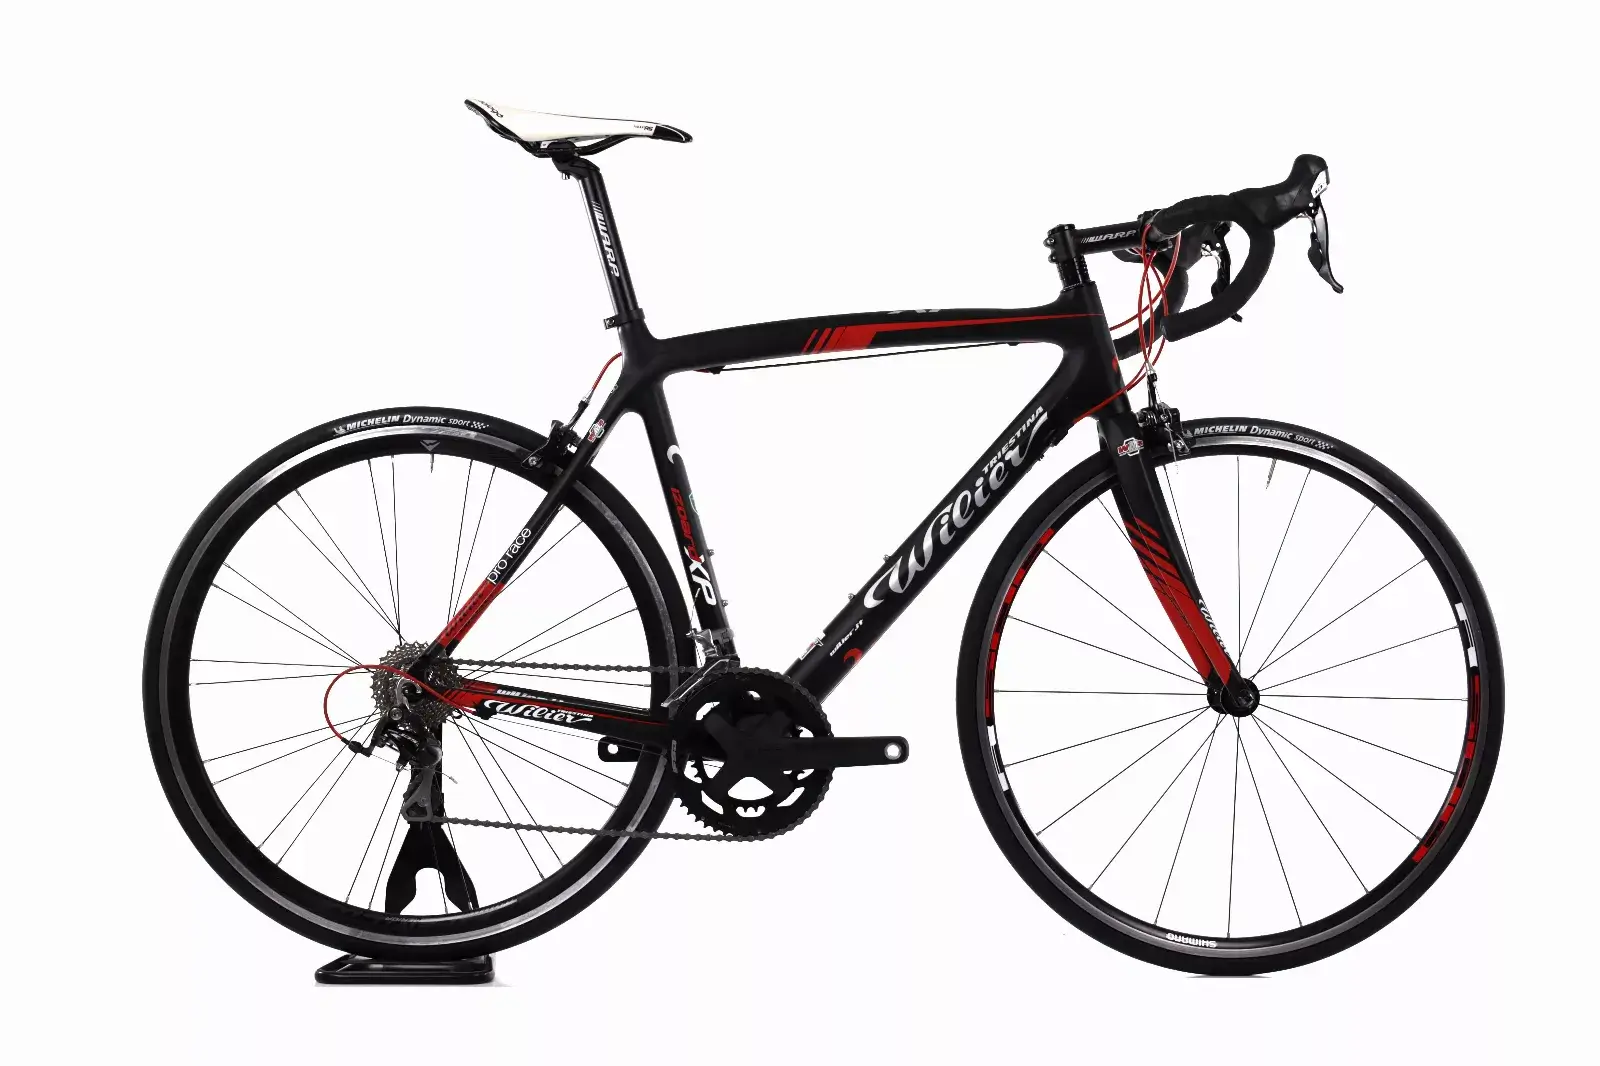 Wilier Izoard xp used in 55 cm | buycycle